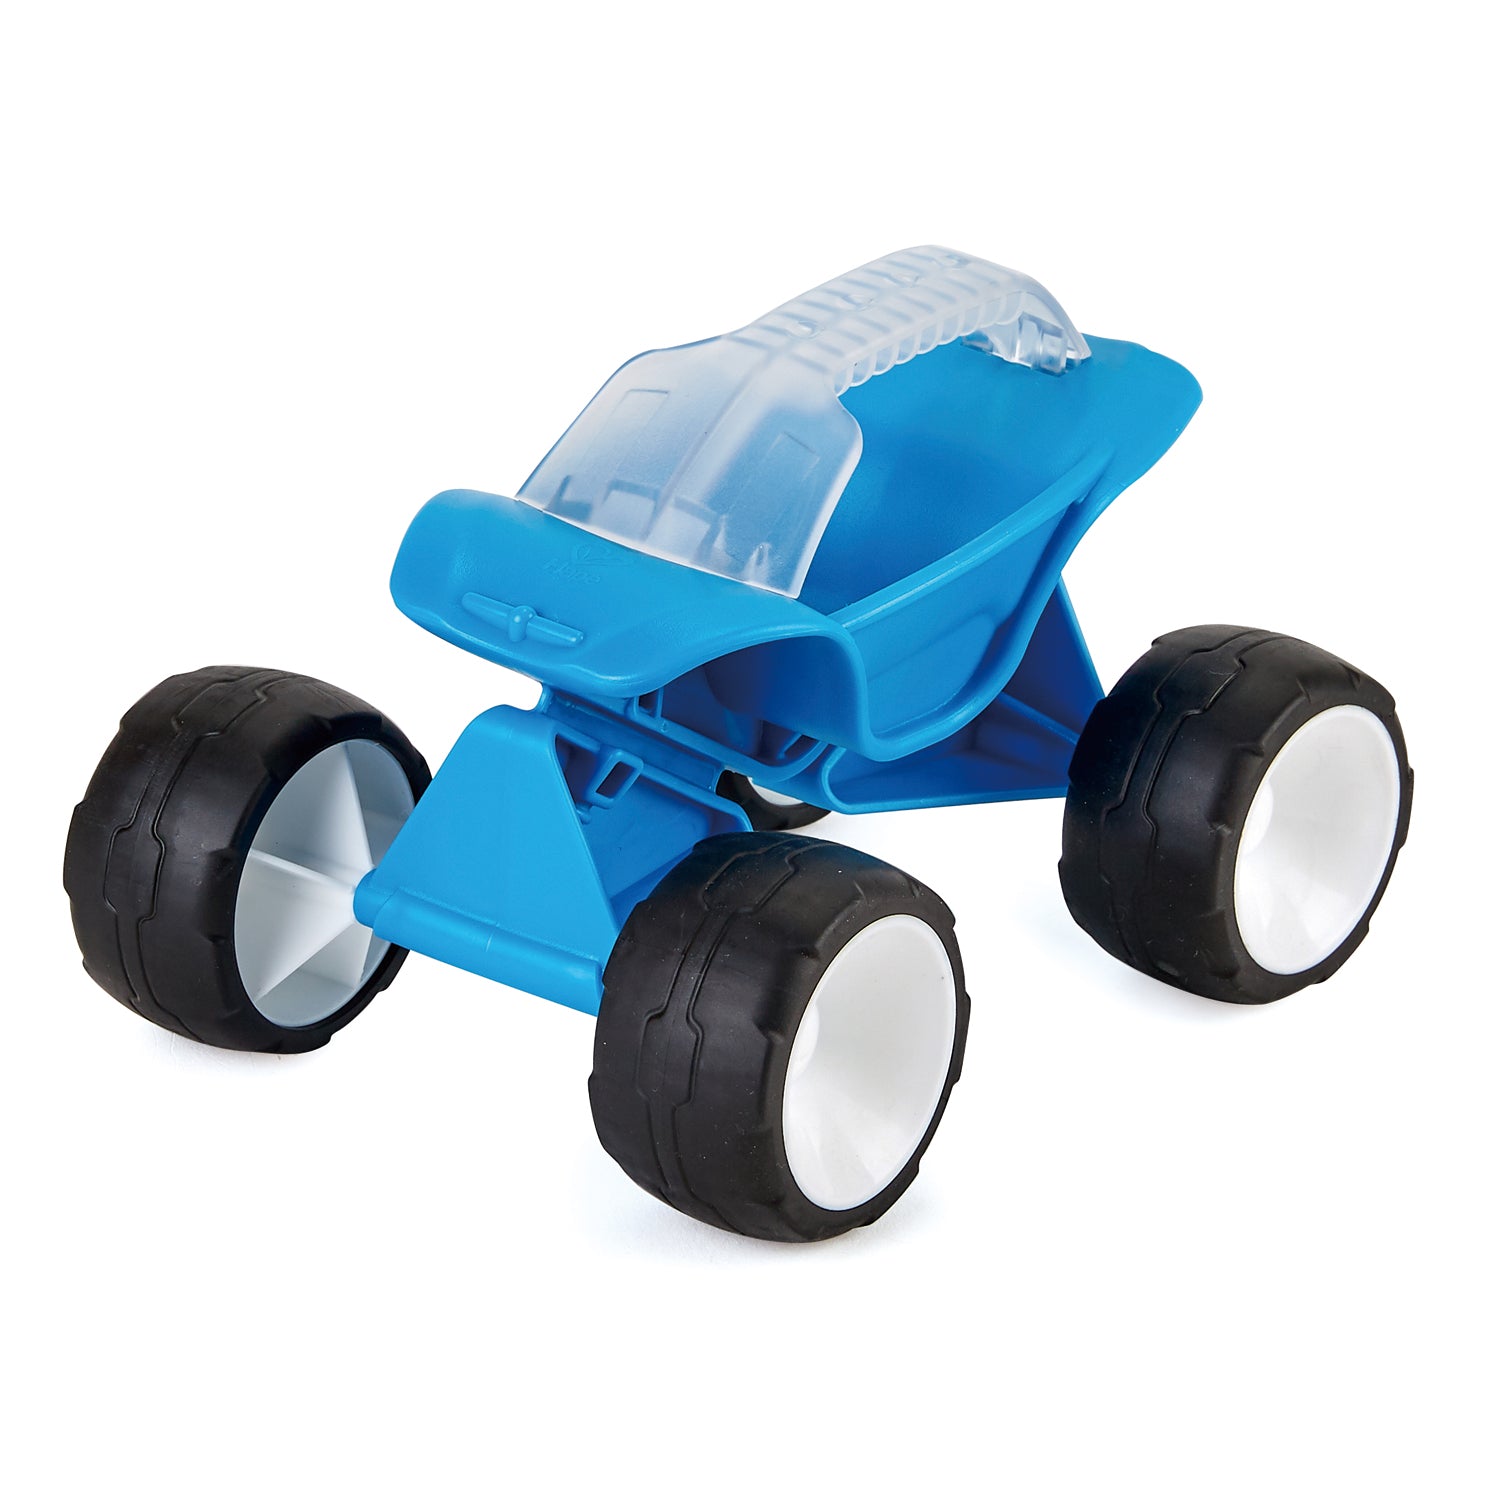 Hape Dune Buggy Blue perfect for the sand or backyard play with quality outdoor toys The Toy Wagon